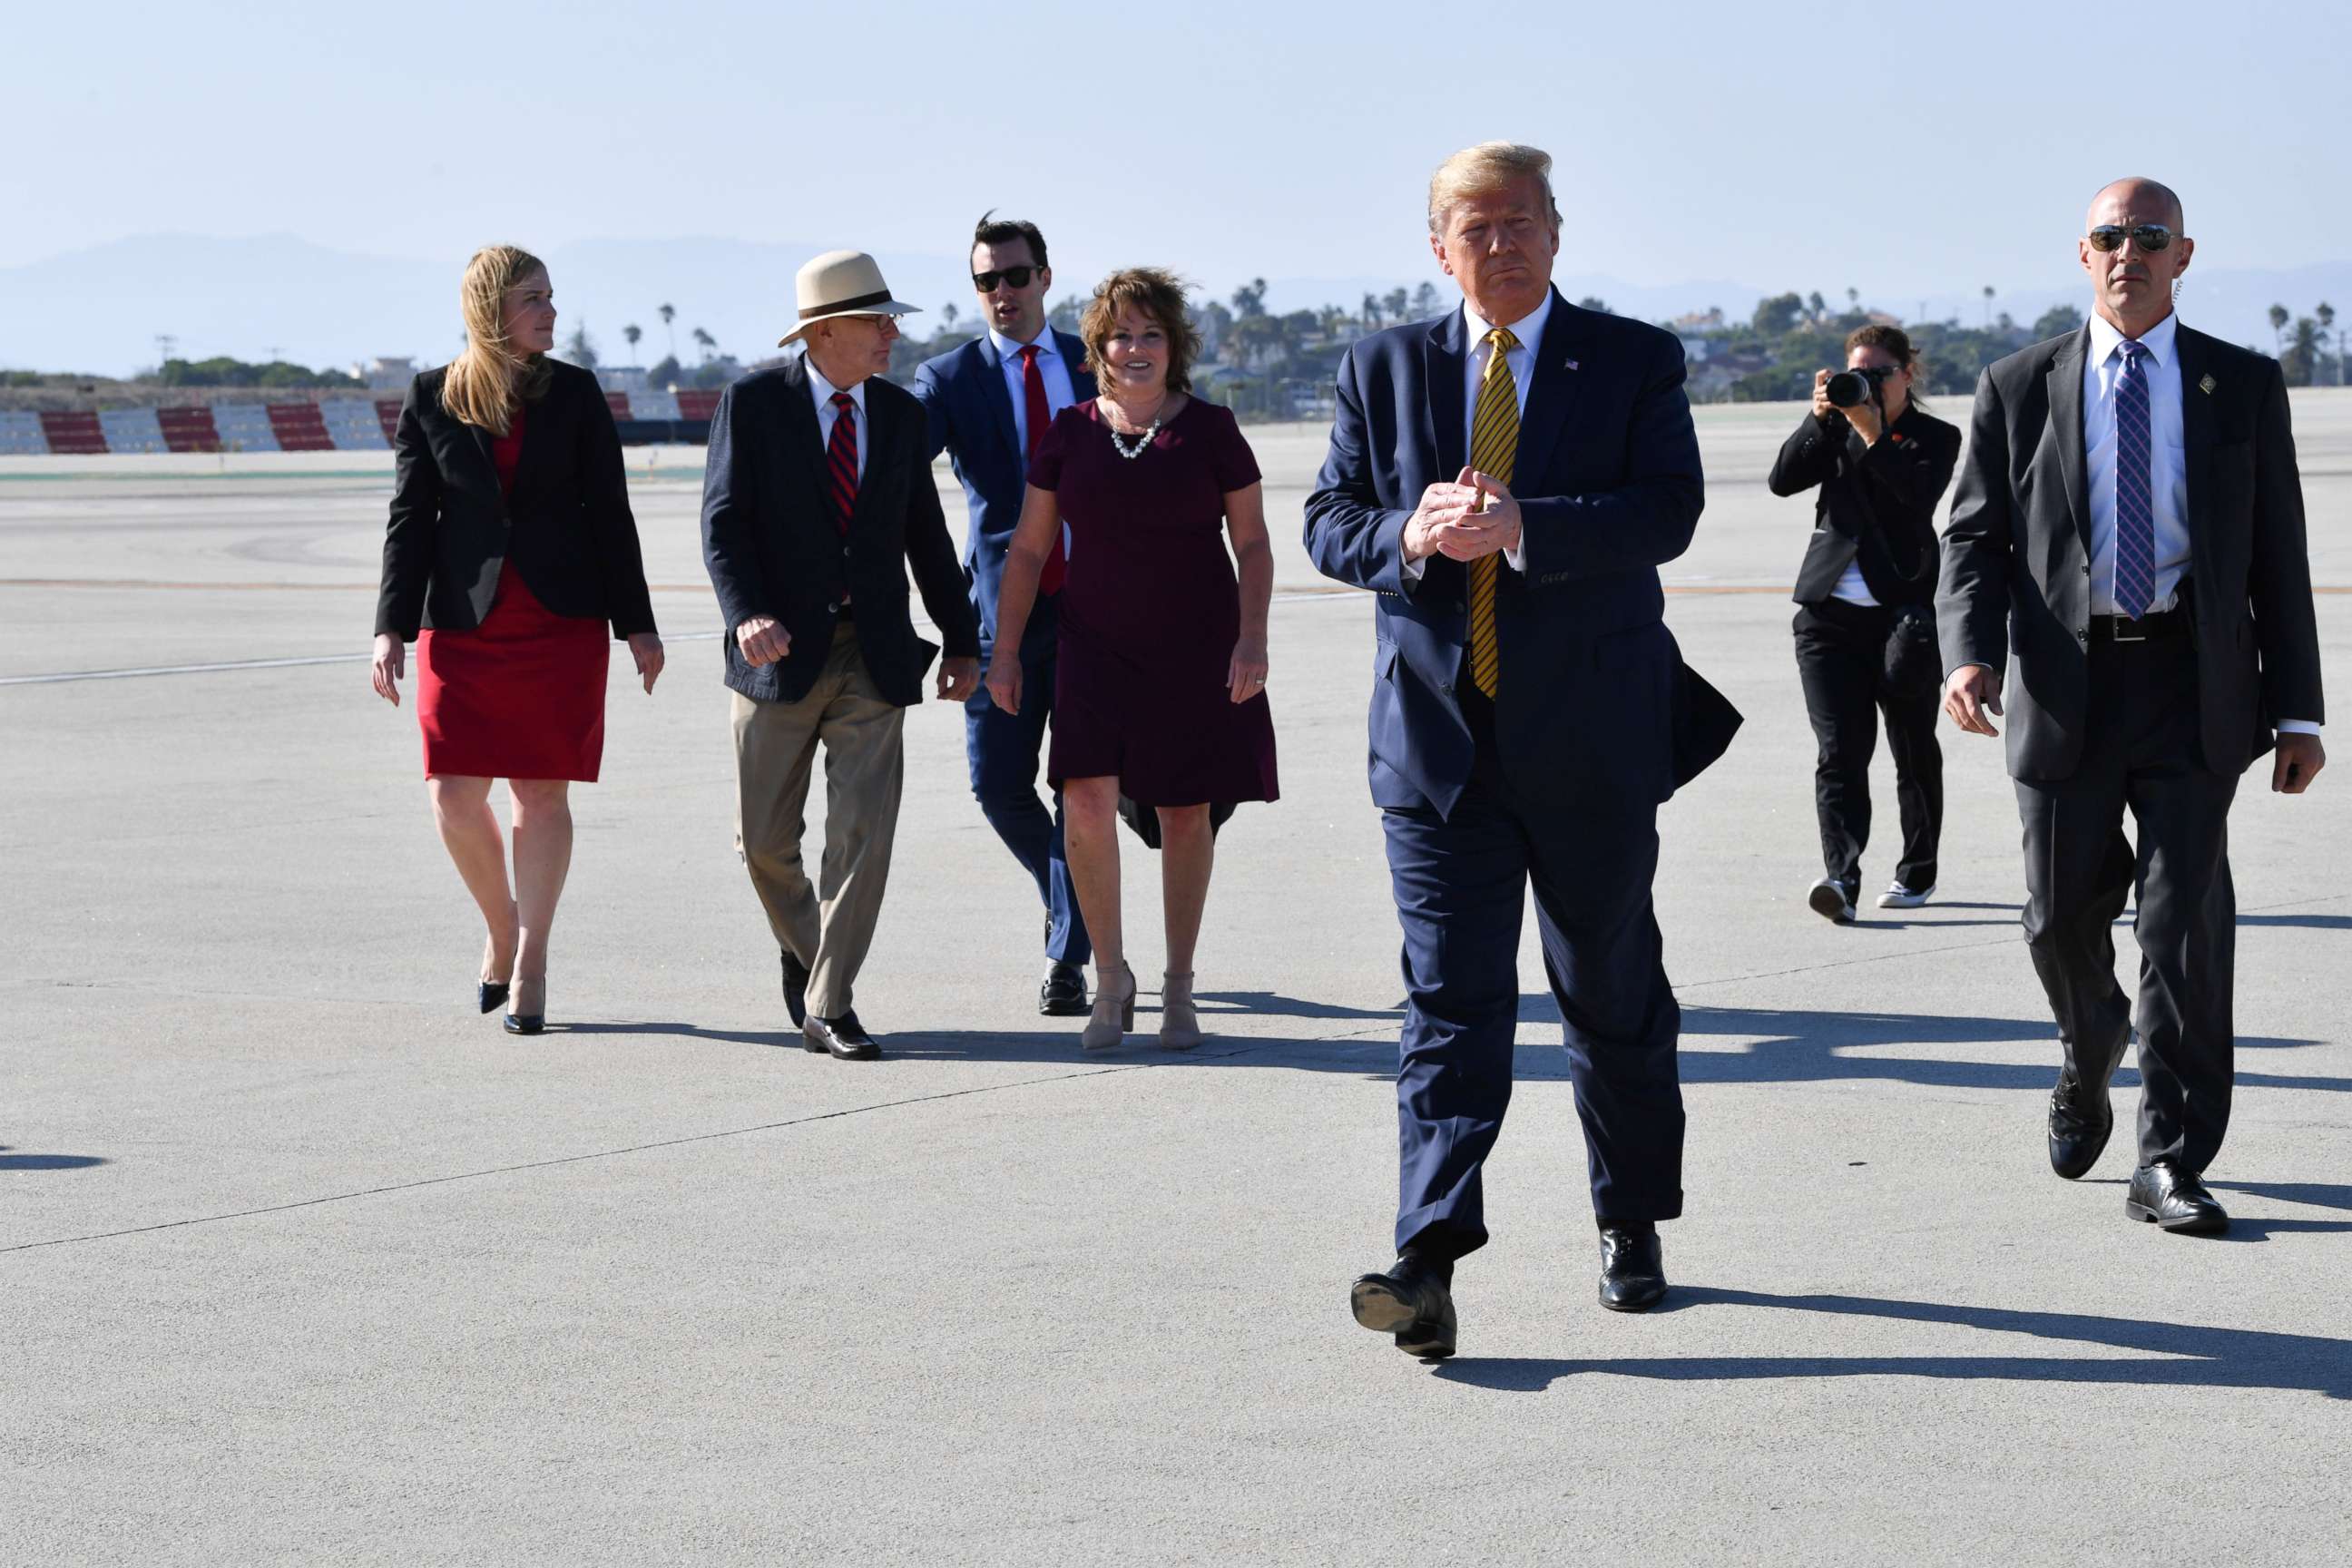 PHOTO: Donald Trump just landed at LAX on his way to attend fundraisers in Los Angeles on September 17, 2019.